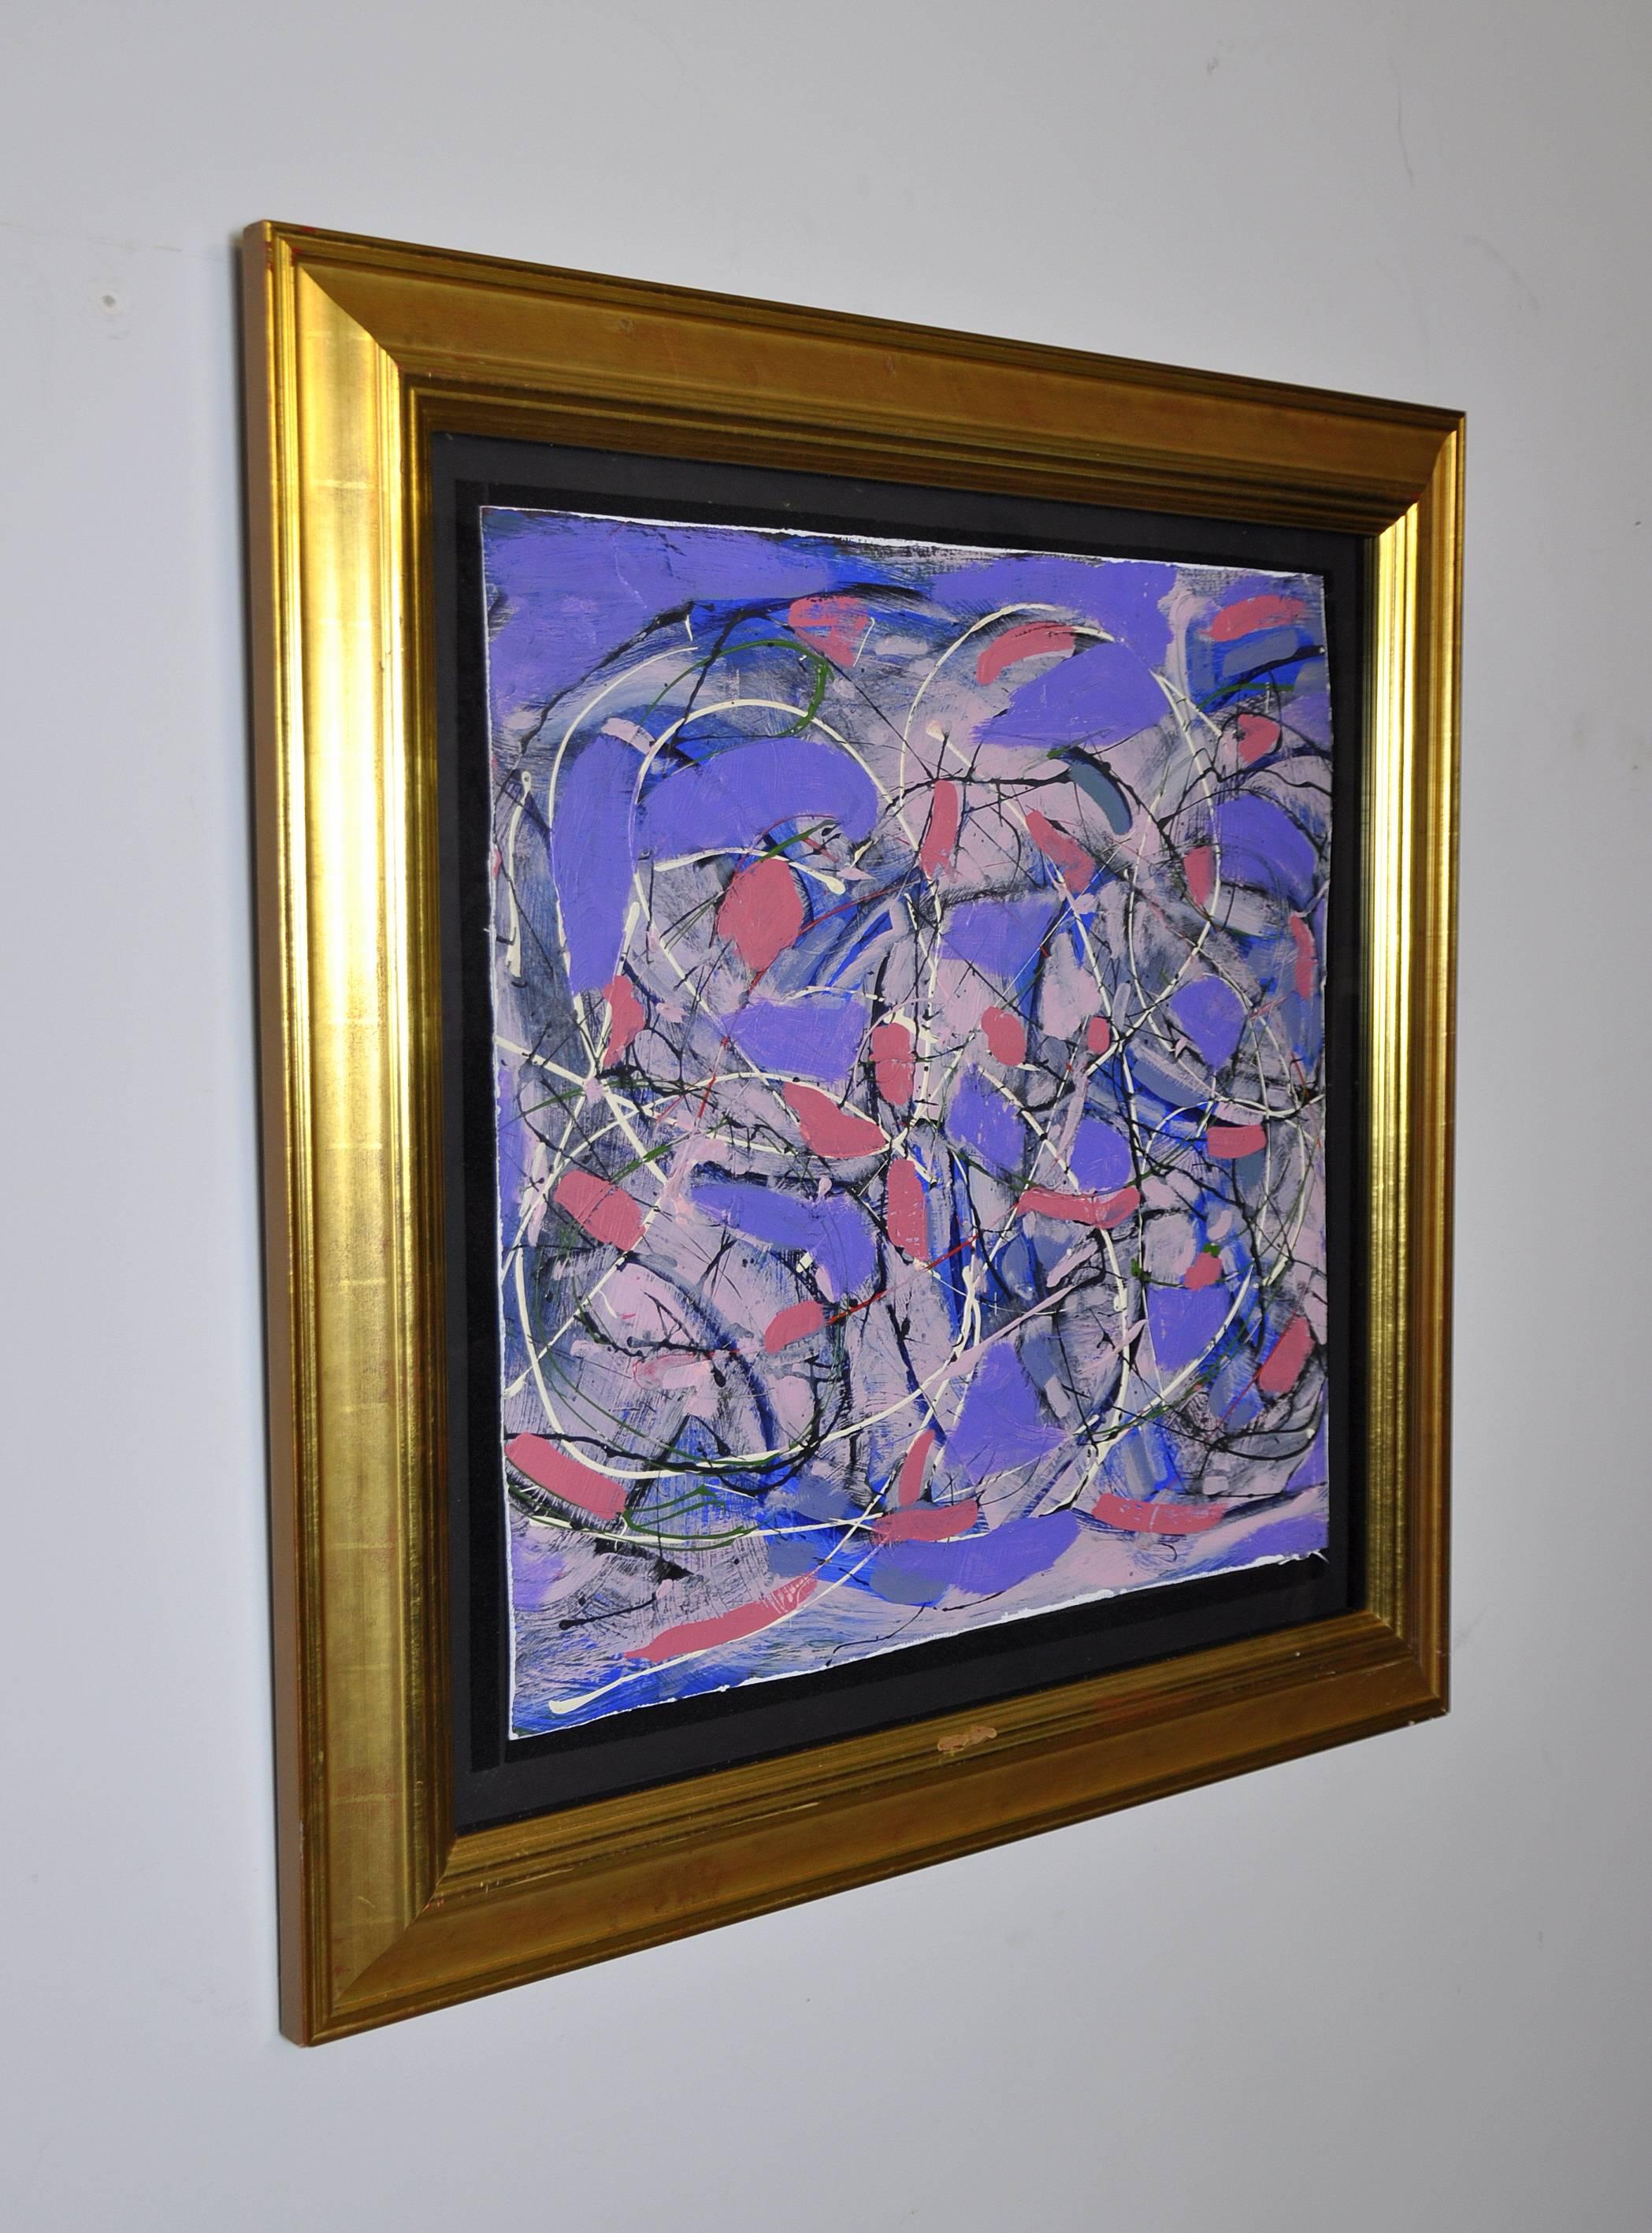 Decorative oil on art board painting by contemporary artist John Frates (b.1943). Painted in the Mid-entury abstract Expressionist style, the work of art exhibits vivid purple and pink complemented by white, black and pastel pink. Signed, dated and